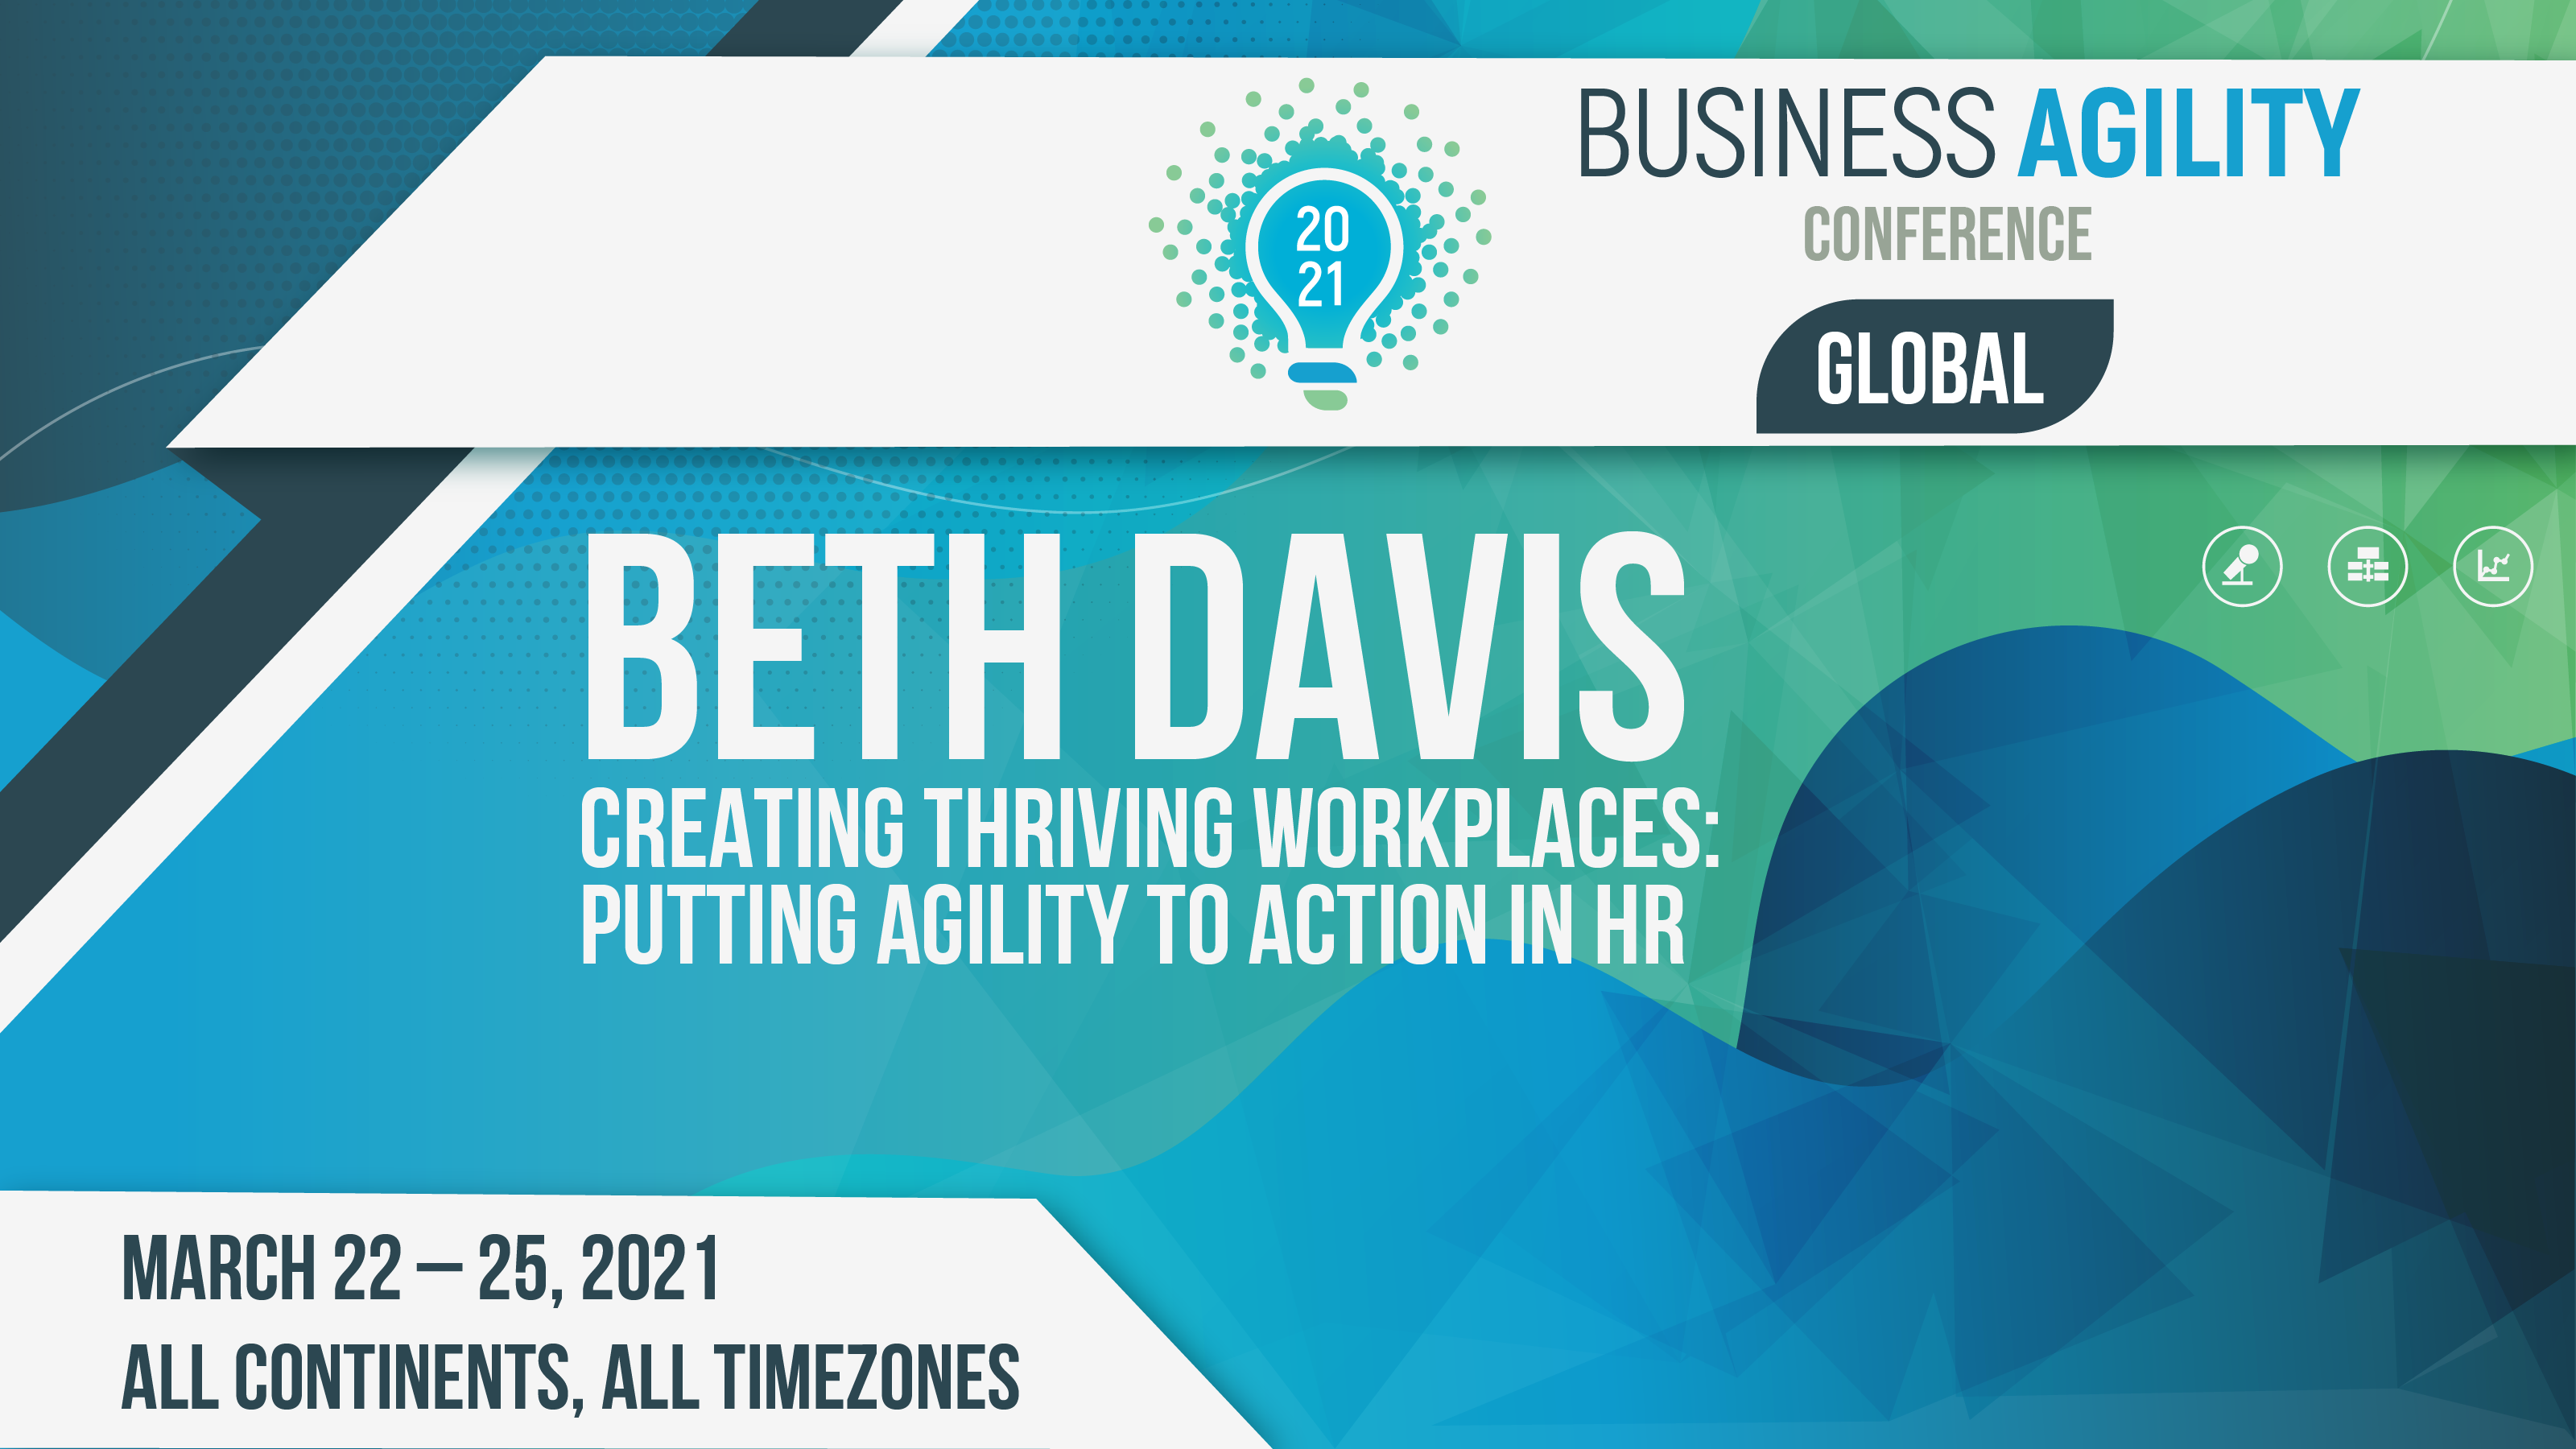 Creating Thriving Workplaces: Putting Agility to Action in HR